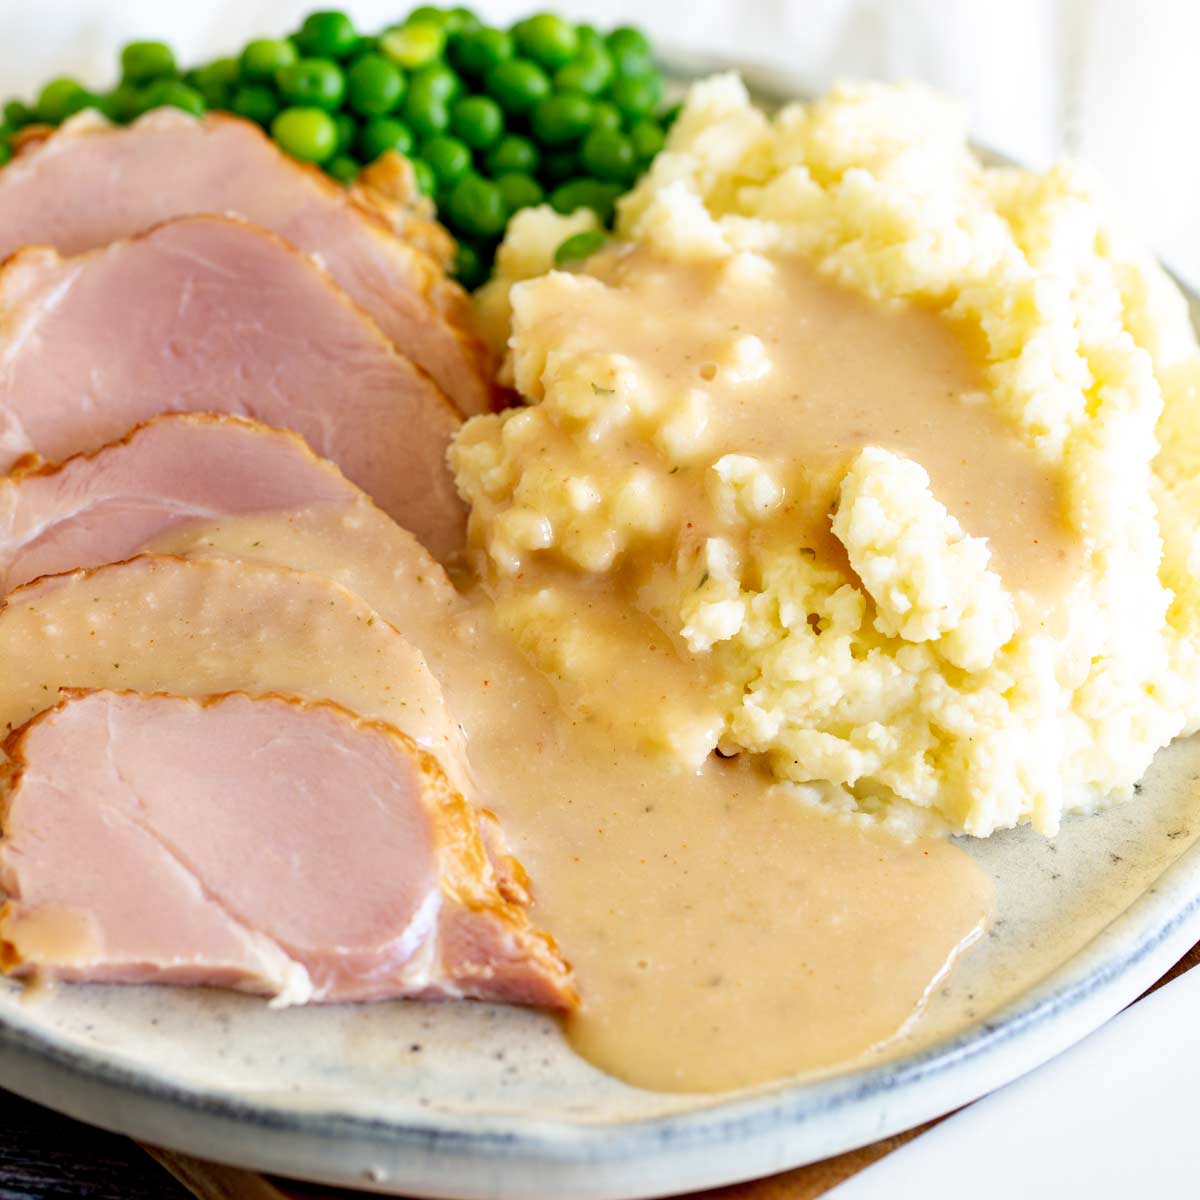 ham, mashed potato, peas and gravy on a stone plate